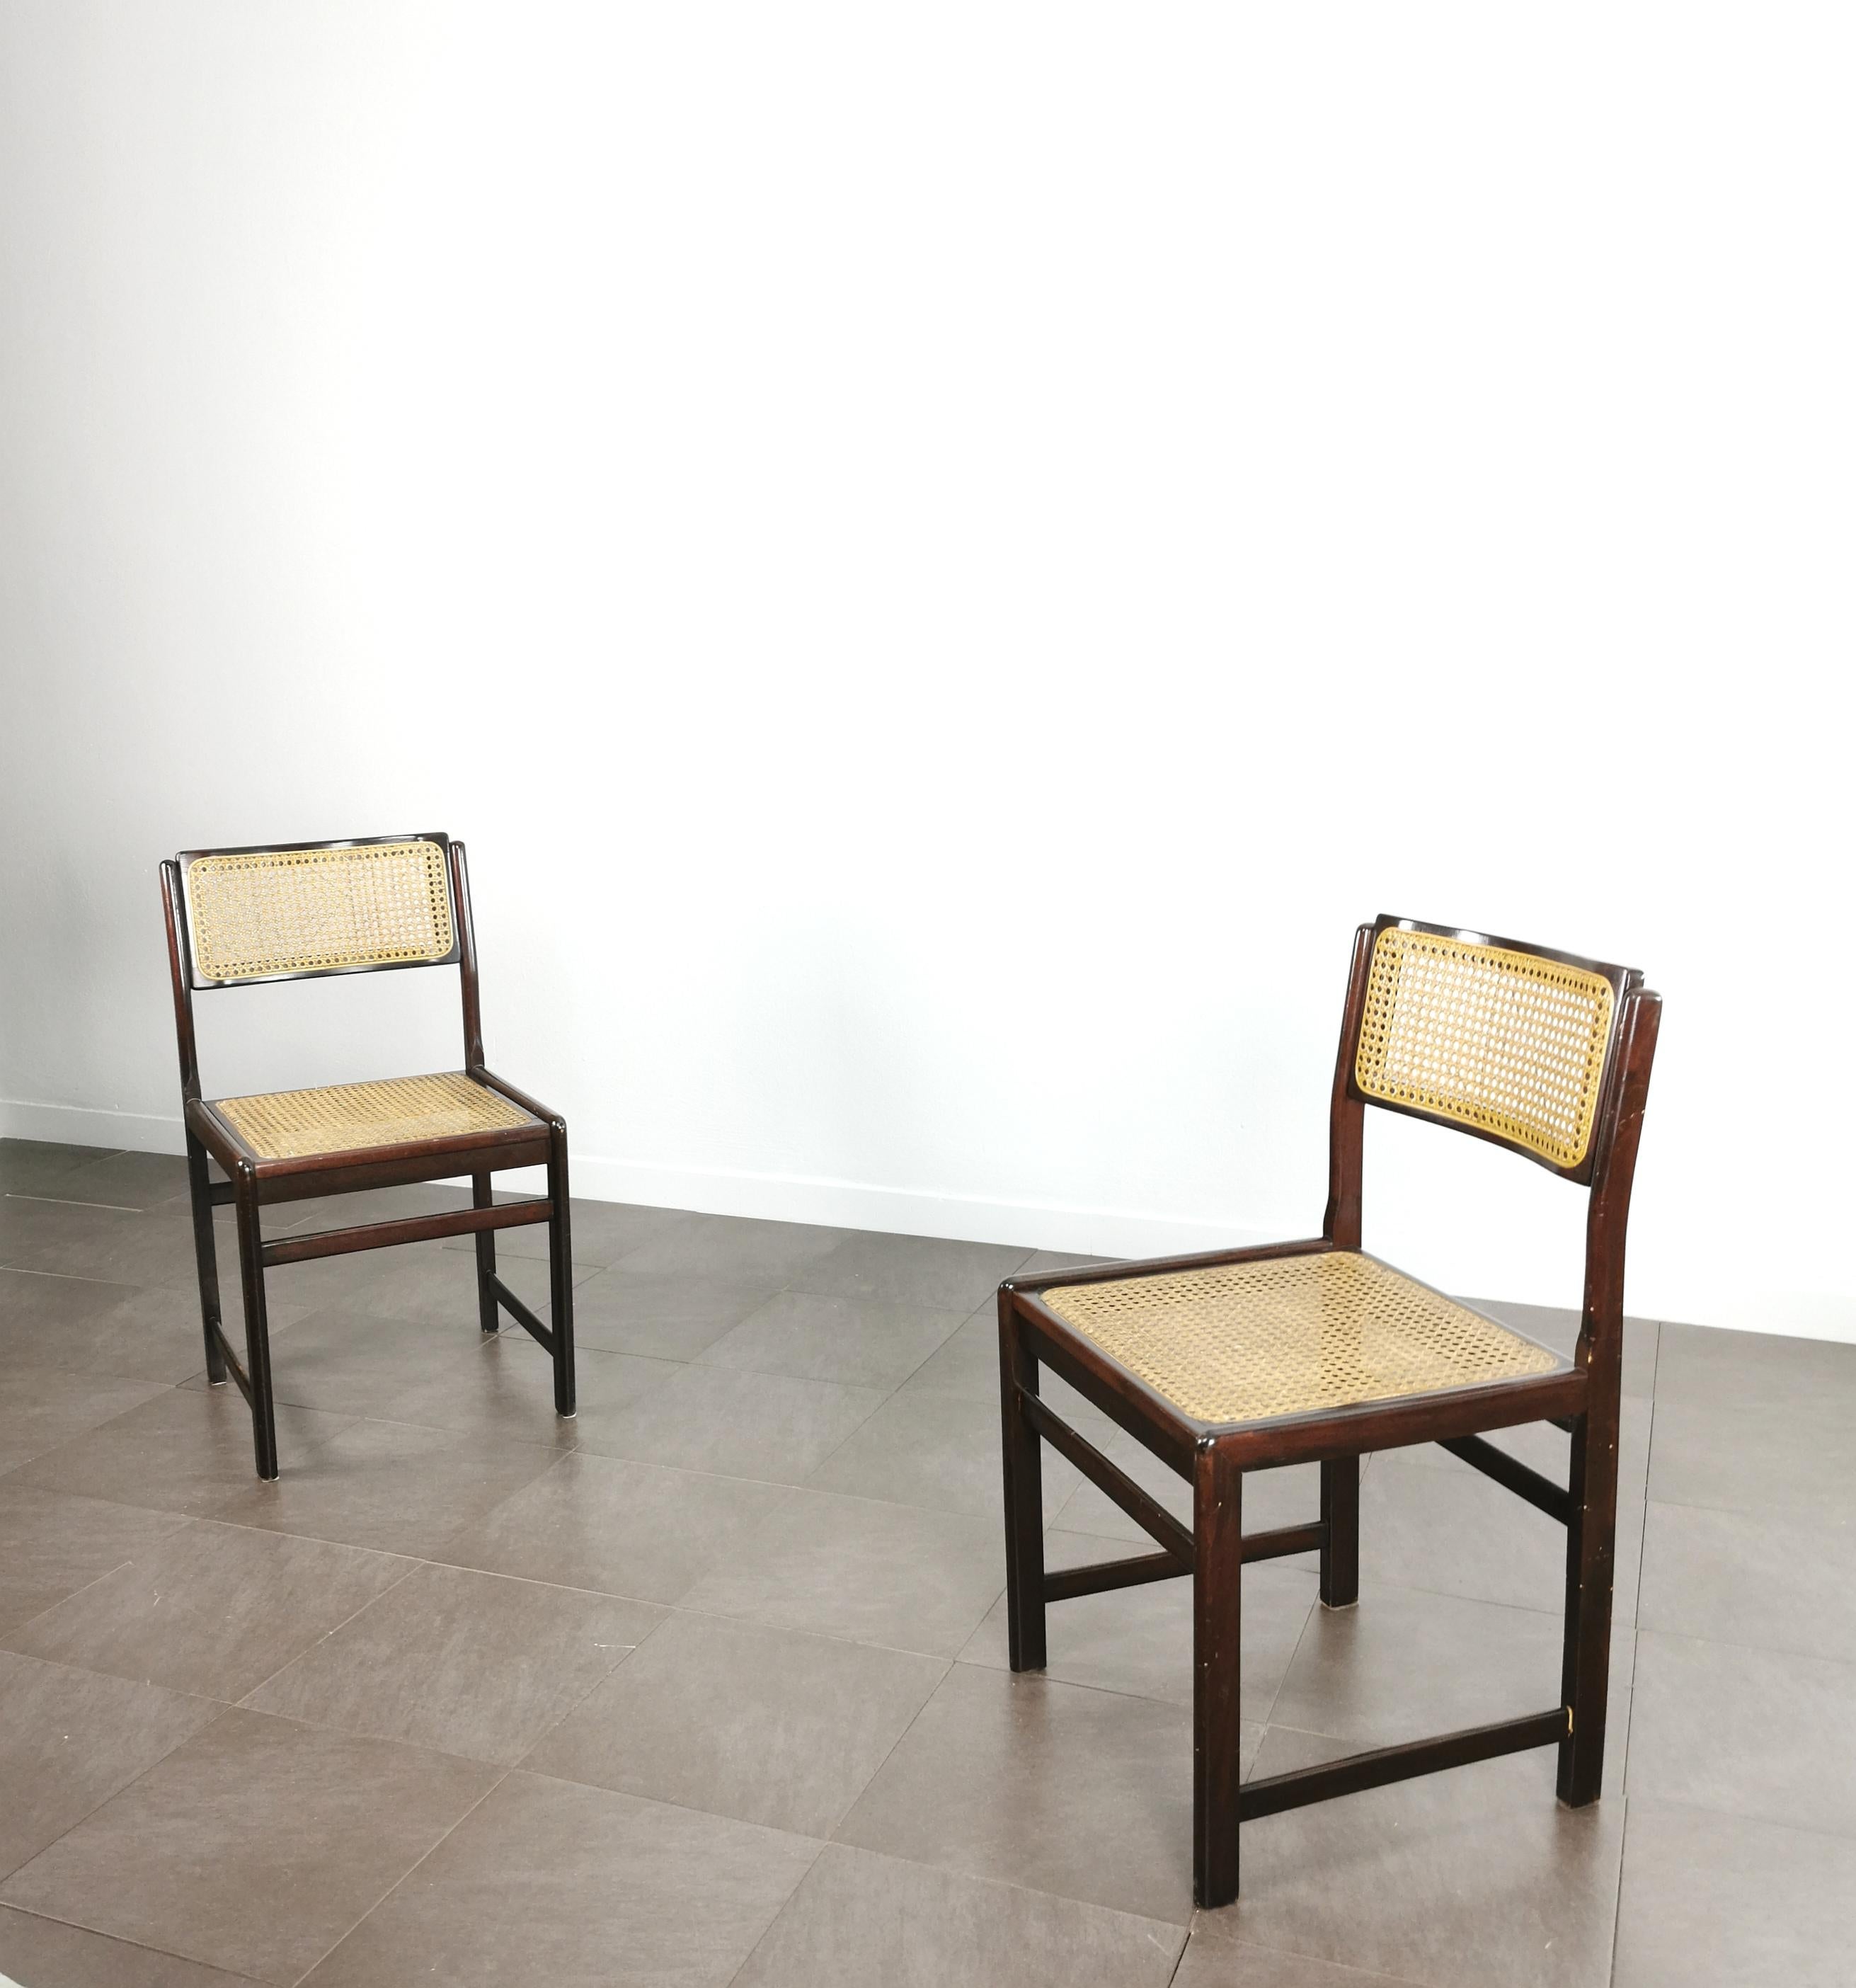 Seating Dining Chairs Wood Vienna Straw Midcentury Italian Design 1960s Set of 2 For Sale 3